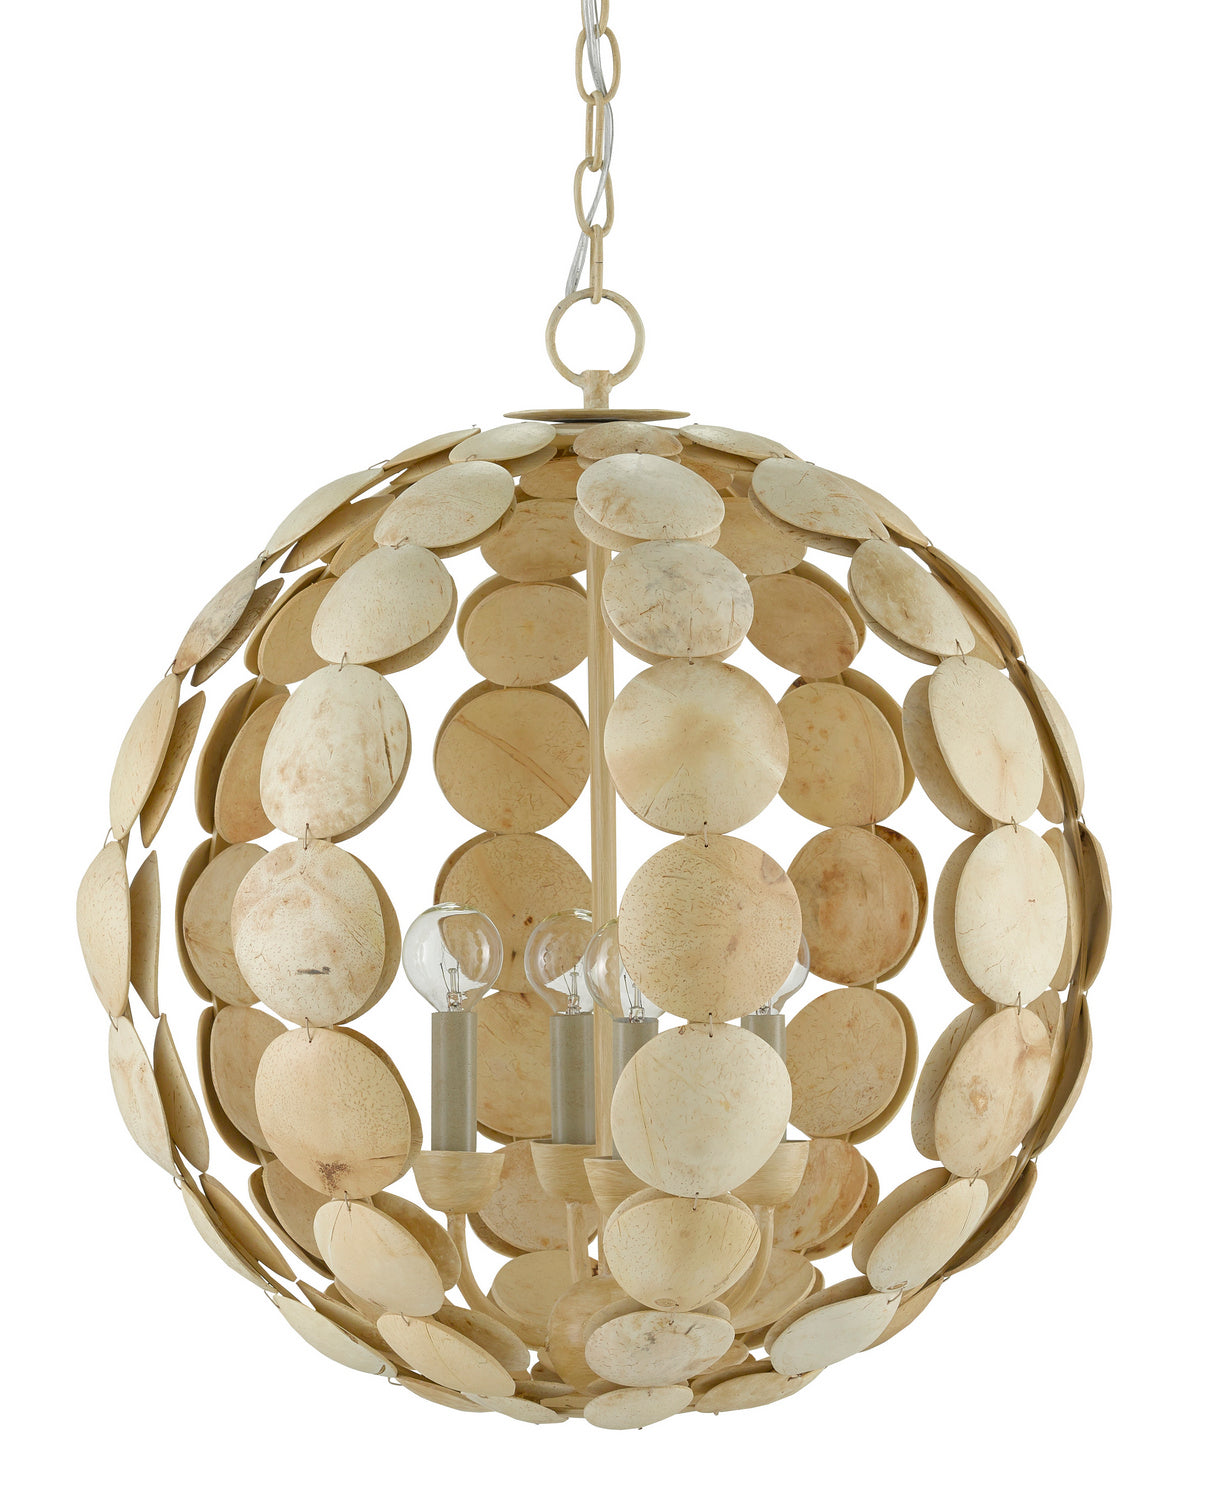 Four Light Chandelier from the Tartufo collection in Coco Cream finish